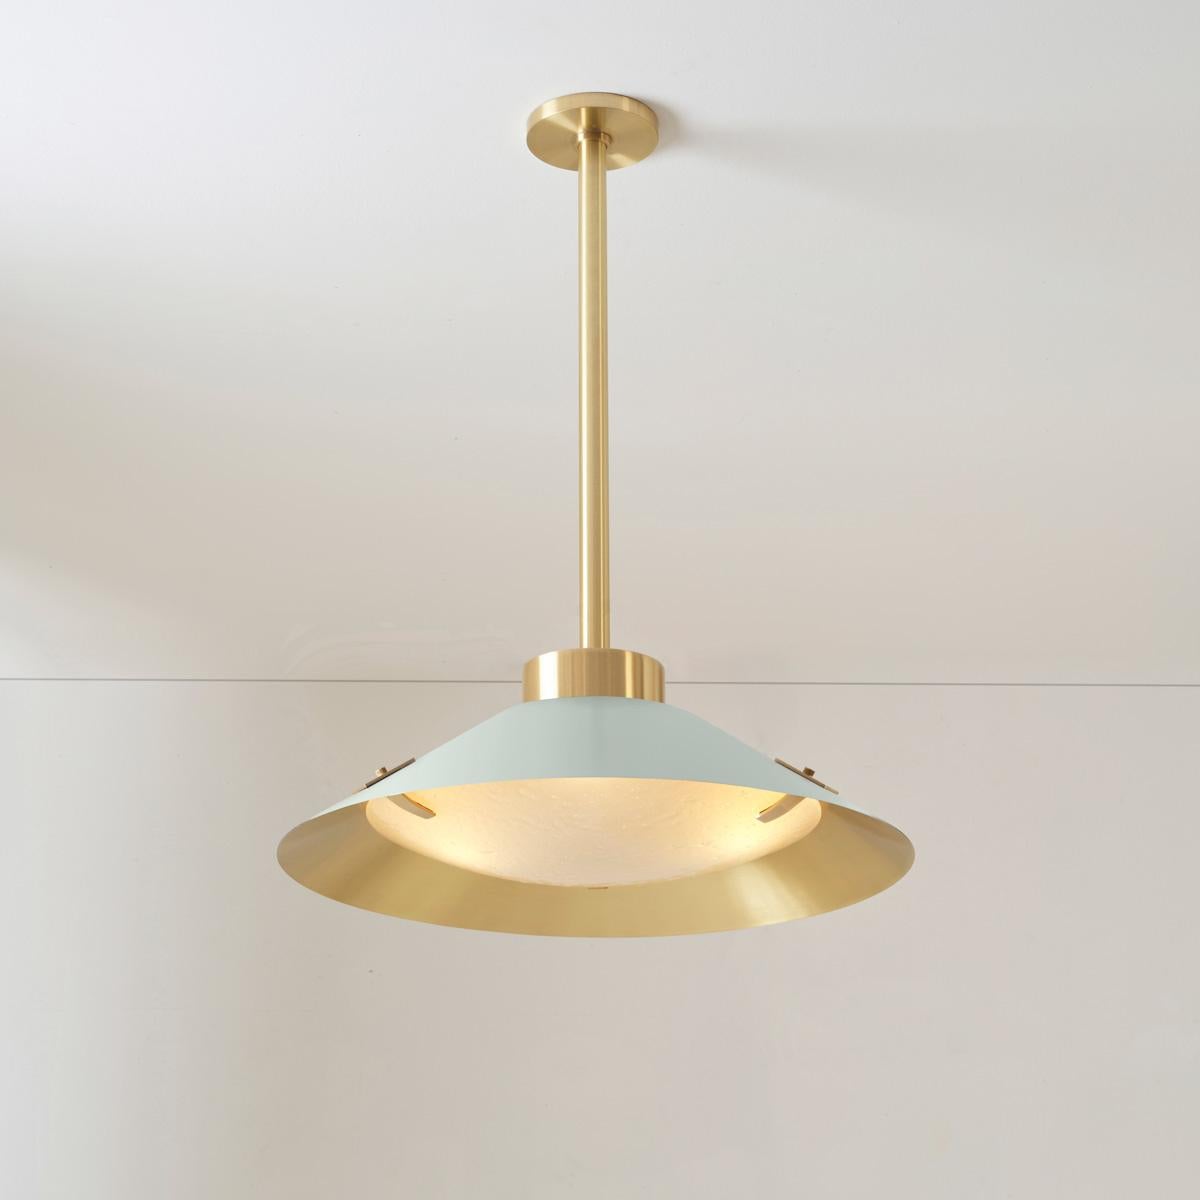 Kono Pendant by Gaspare Asaro. Satin Brass and Stone Grey For Sale 3